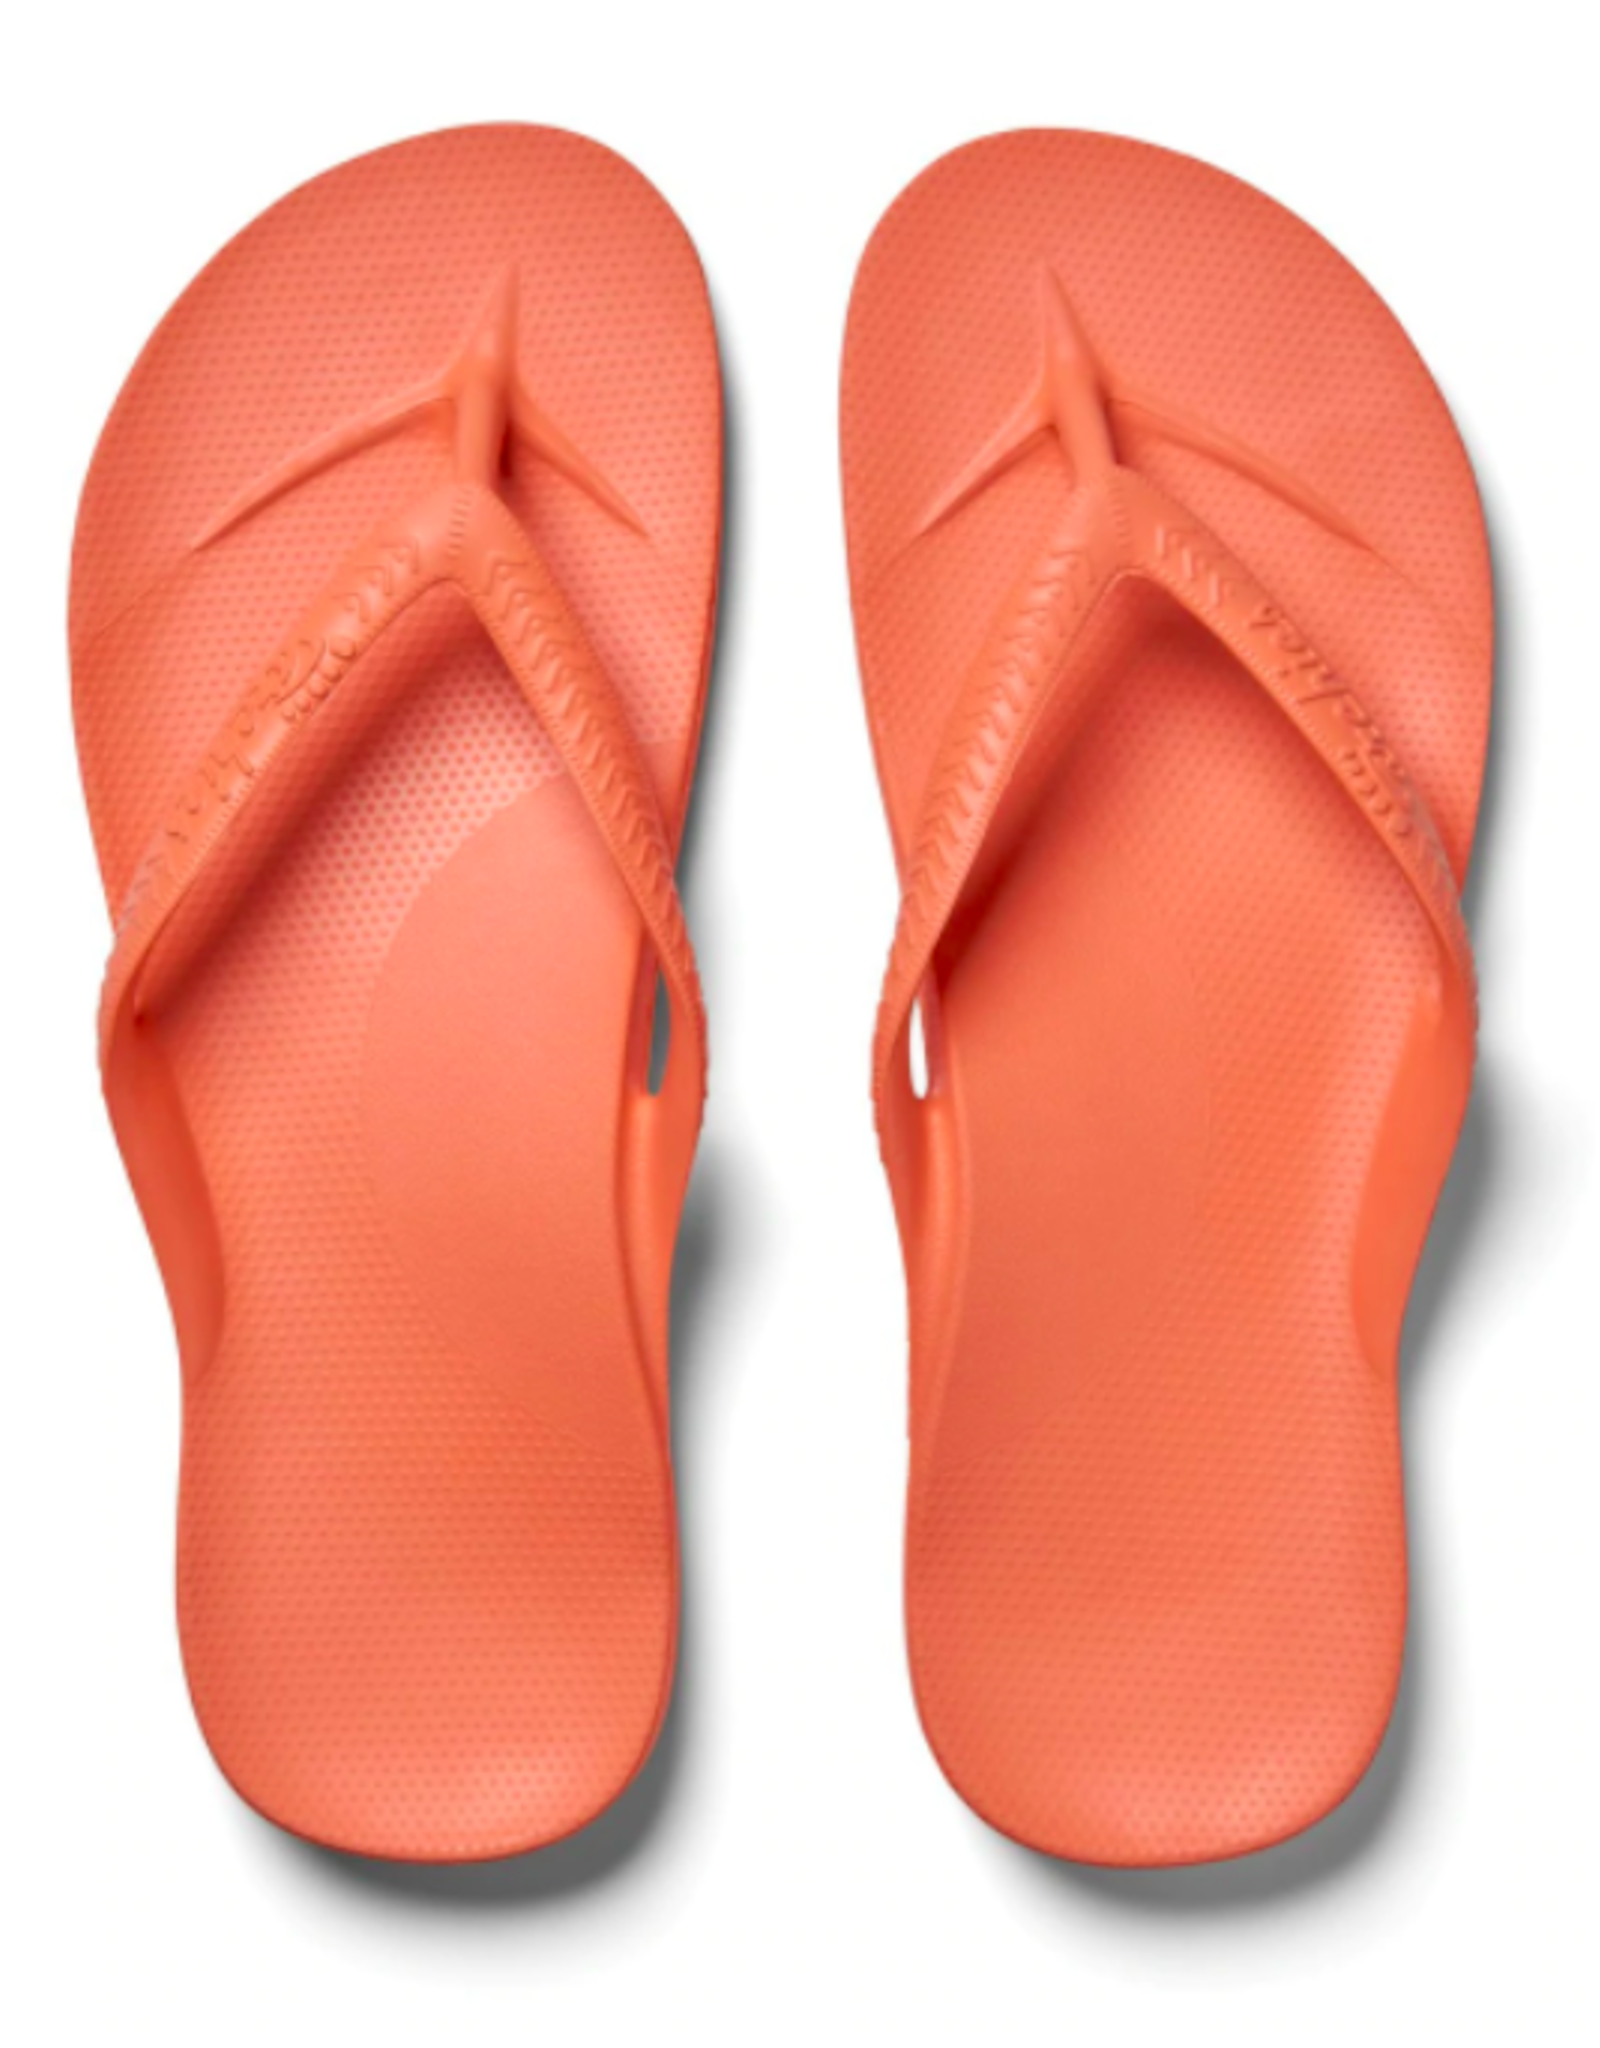 Archies Arch Support Flip Flop